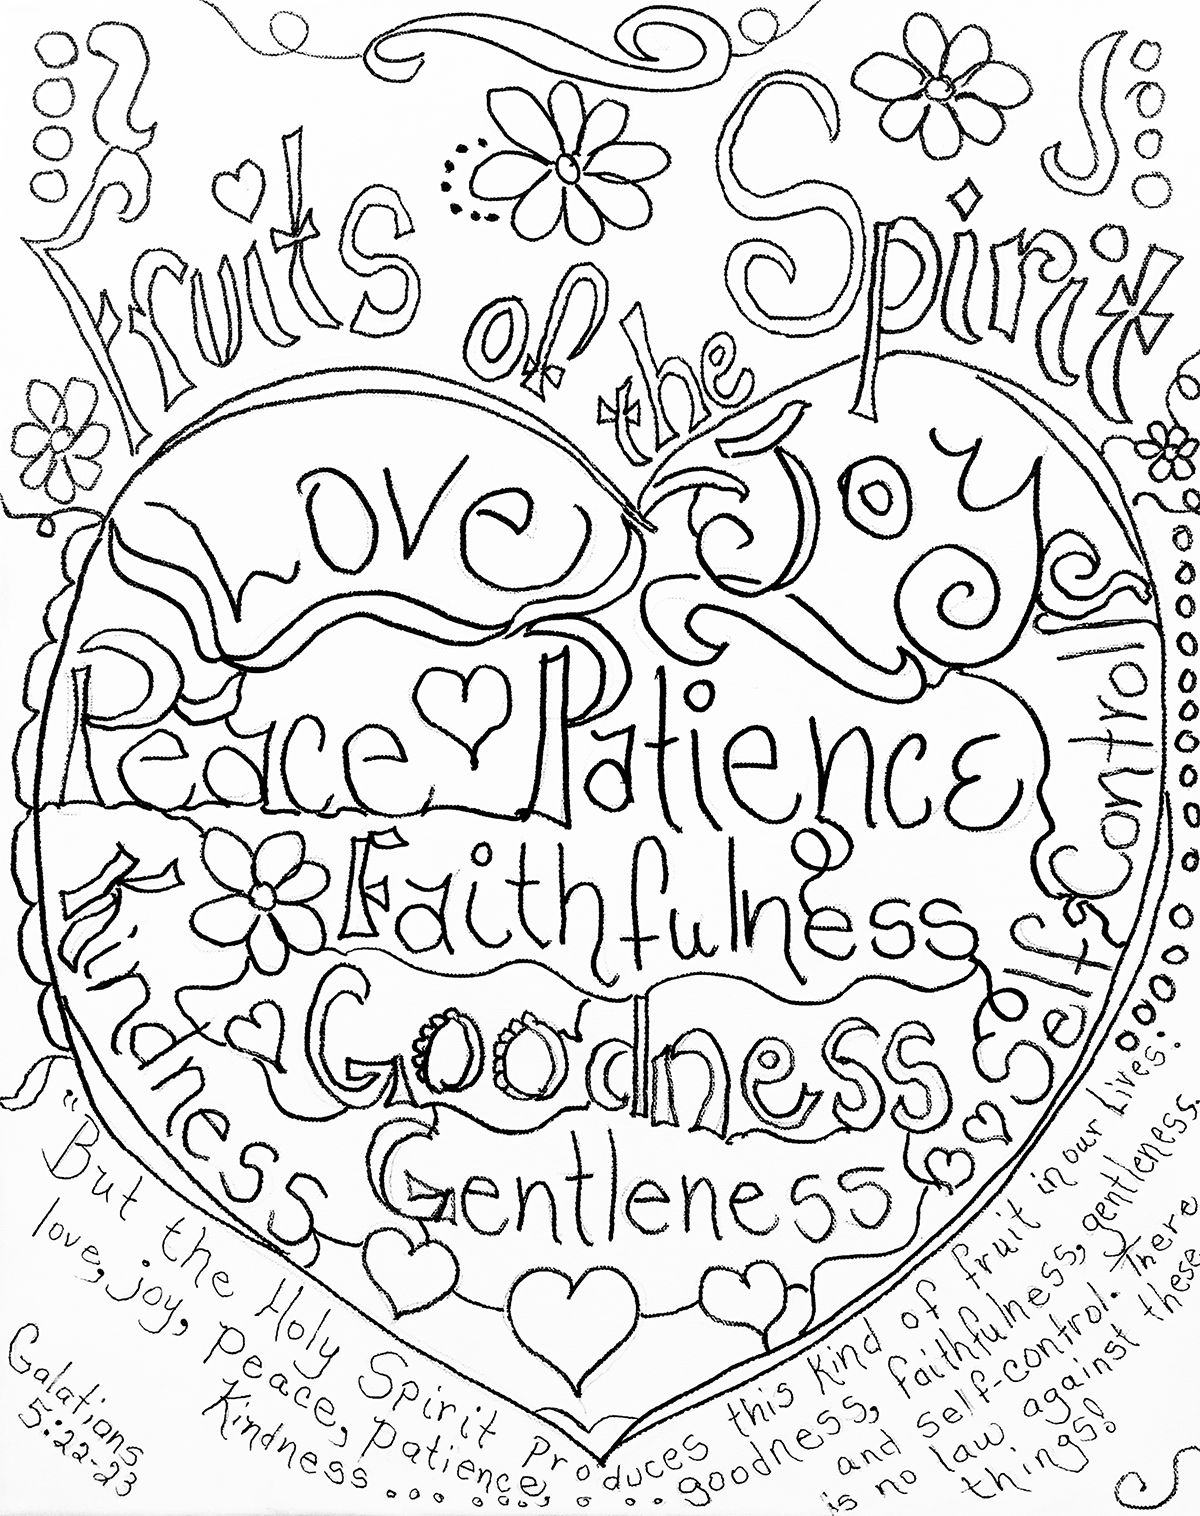 Fruits Of The Spirit Coloring Page By Carolyn Altman Galatians 5 22 33 